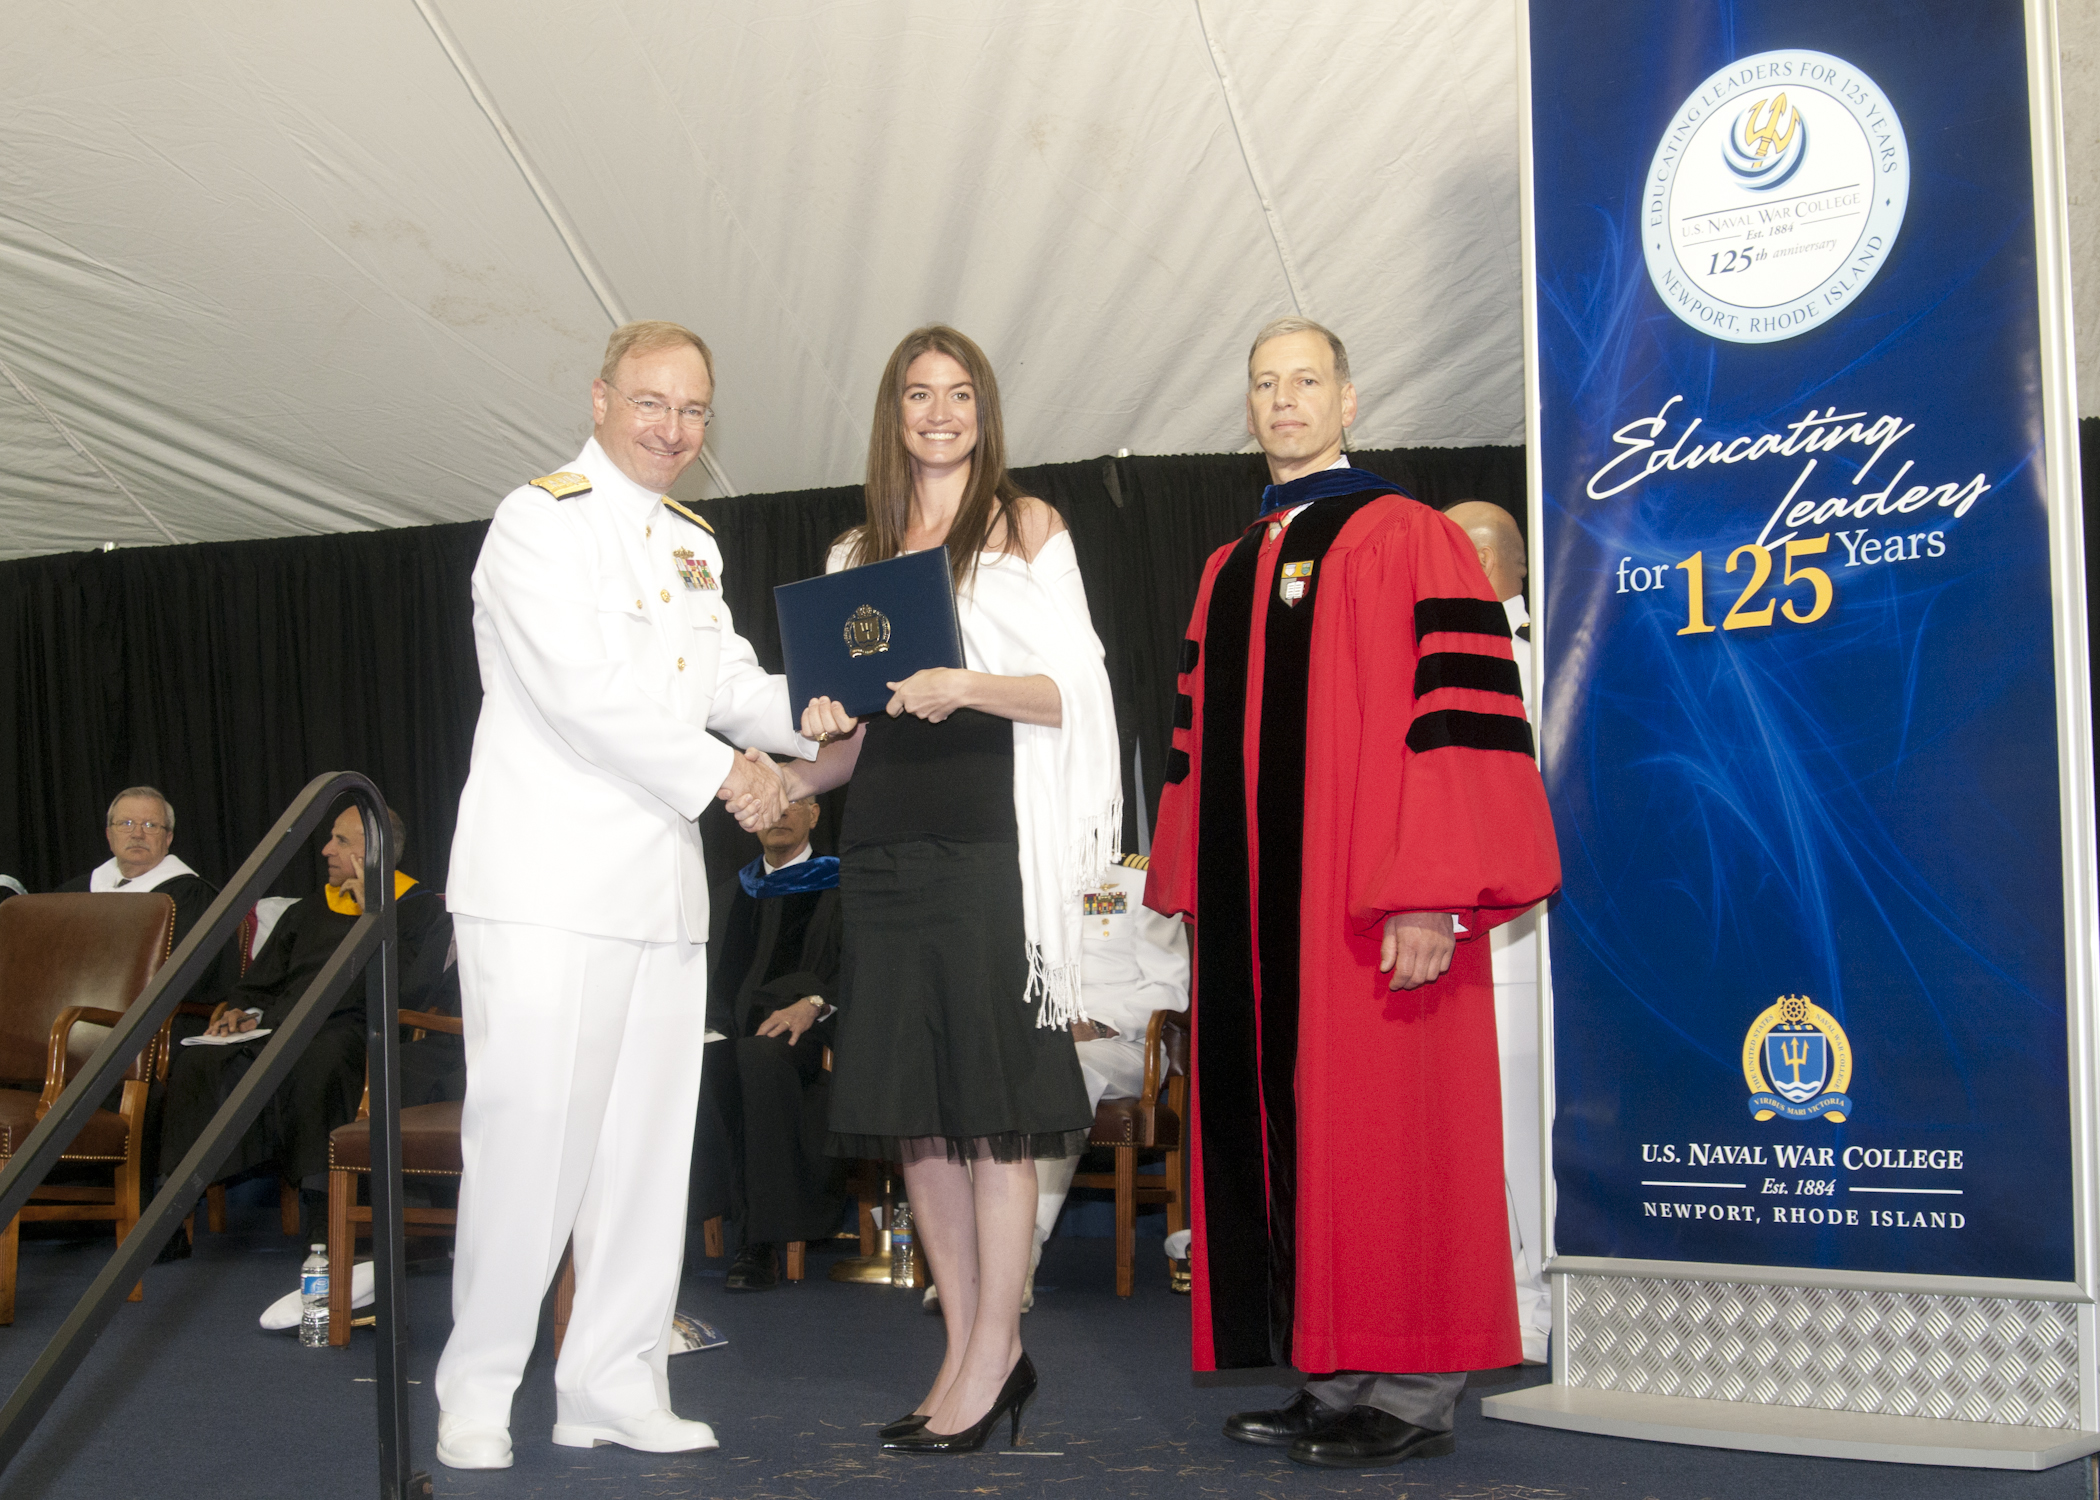 Naval War College Graduation Ceremony at the Naval War College in Newport, RI. The resident graduating class included 303 members of the Navy, Marine Corps, Air Force, Army, Coast Guard, and civilian government employees as well as 120 international students from 68 countries. Of the 1,042 College of Distance Education graduates throughout the world, 108 traveled to Newport to participate in the ceremony. (U.S. Navy photo by Chief Electronics Technician James B Clarke)